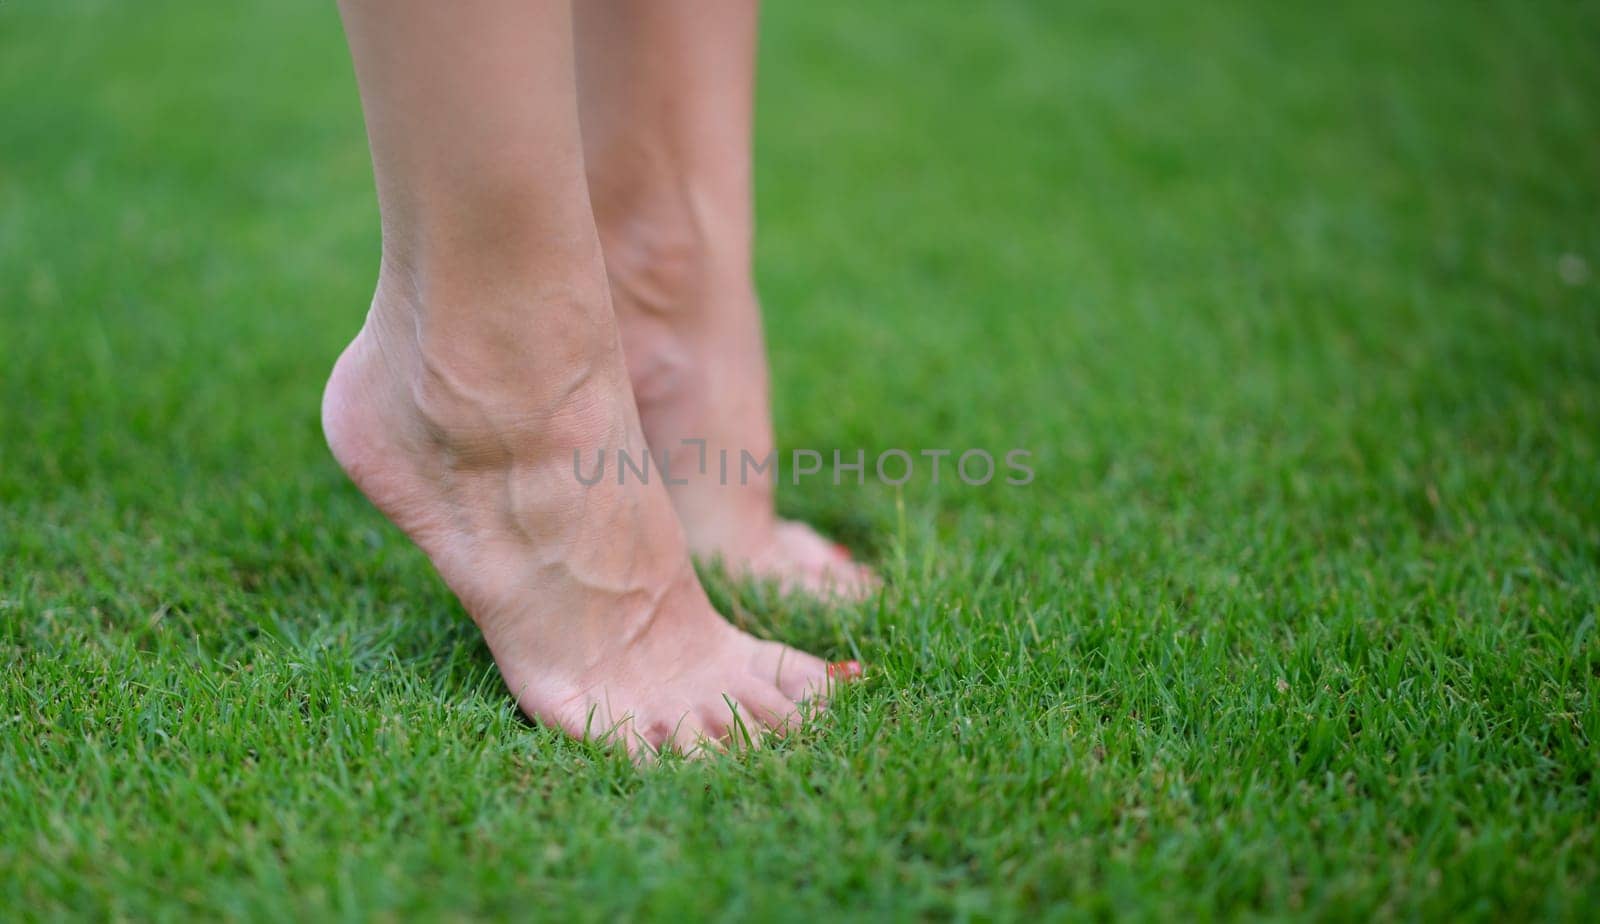 Bare female feet standing on green grass on tiptoe closeup. Yoga in nature concept